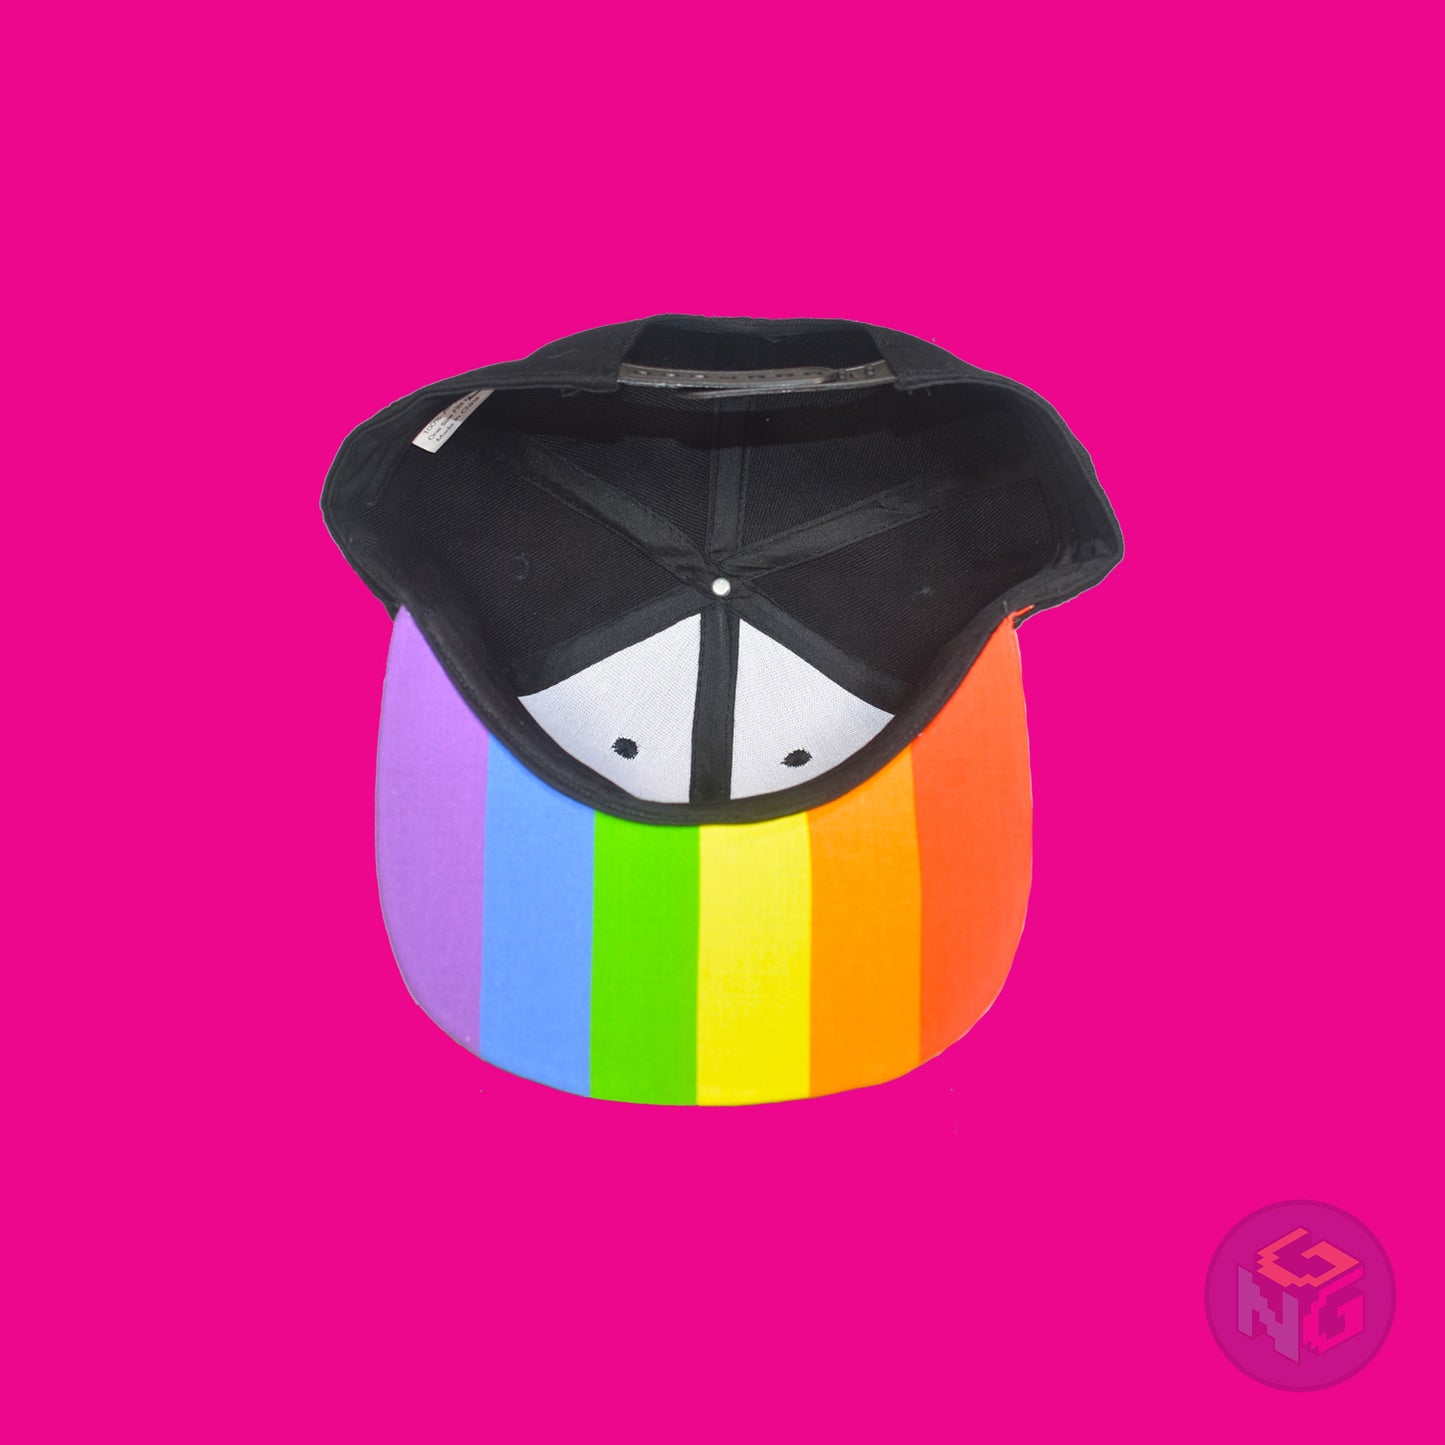 Black flat bill snapback hat. The brim has the rainbow pride flag on both sides and the front of the hat has the word “PRIDE!” in rainbow letters. Underside view